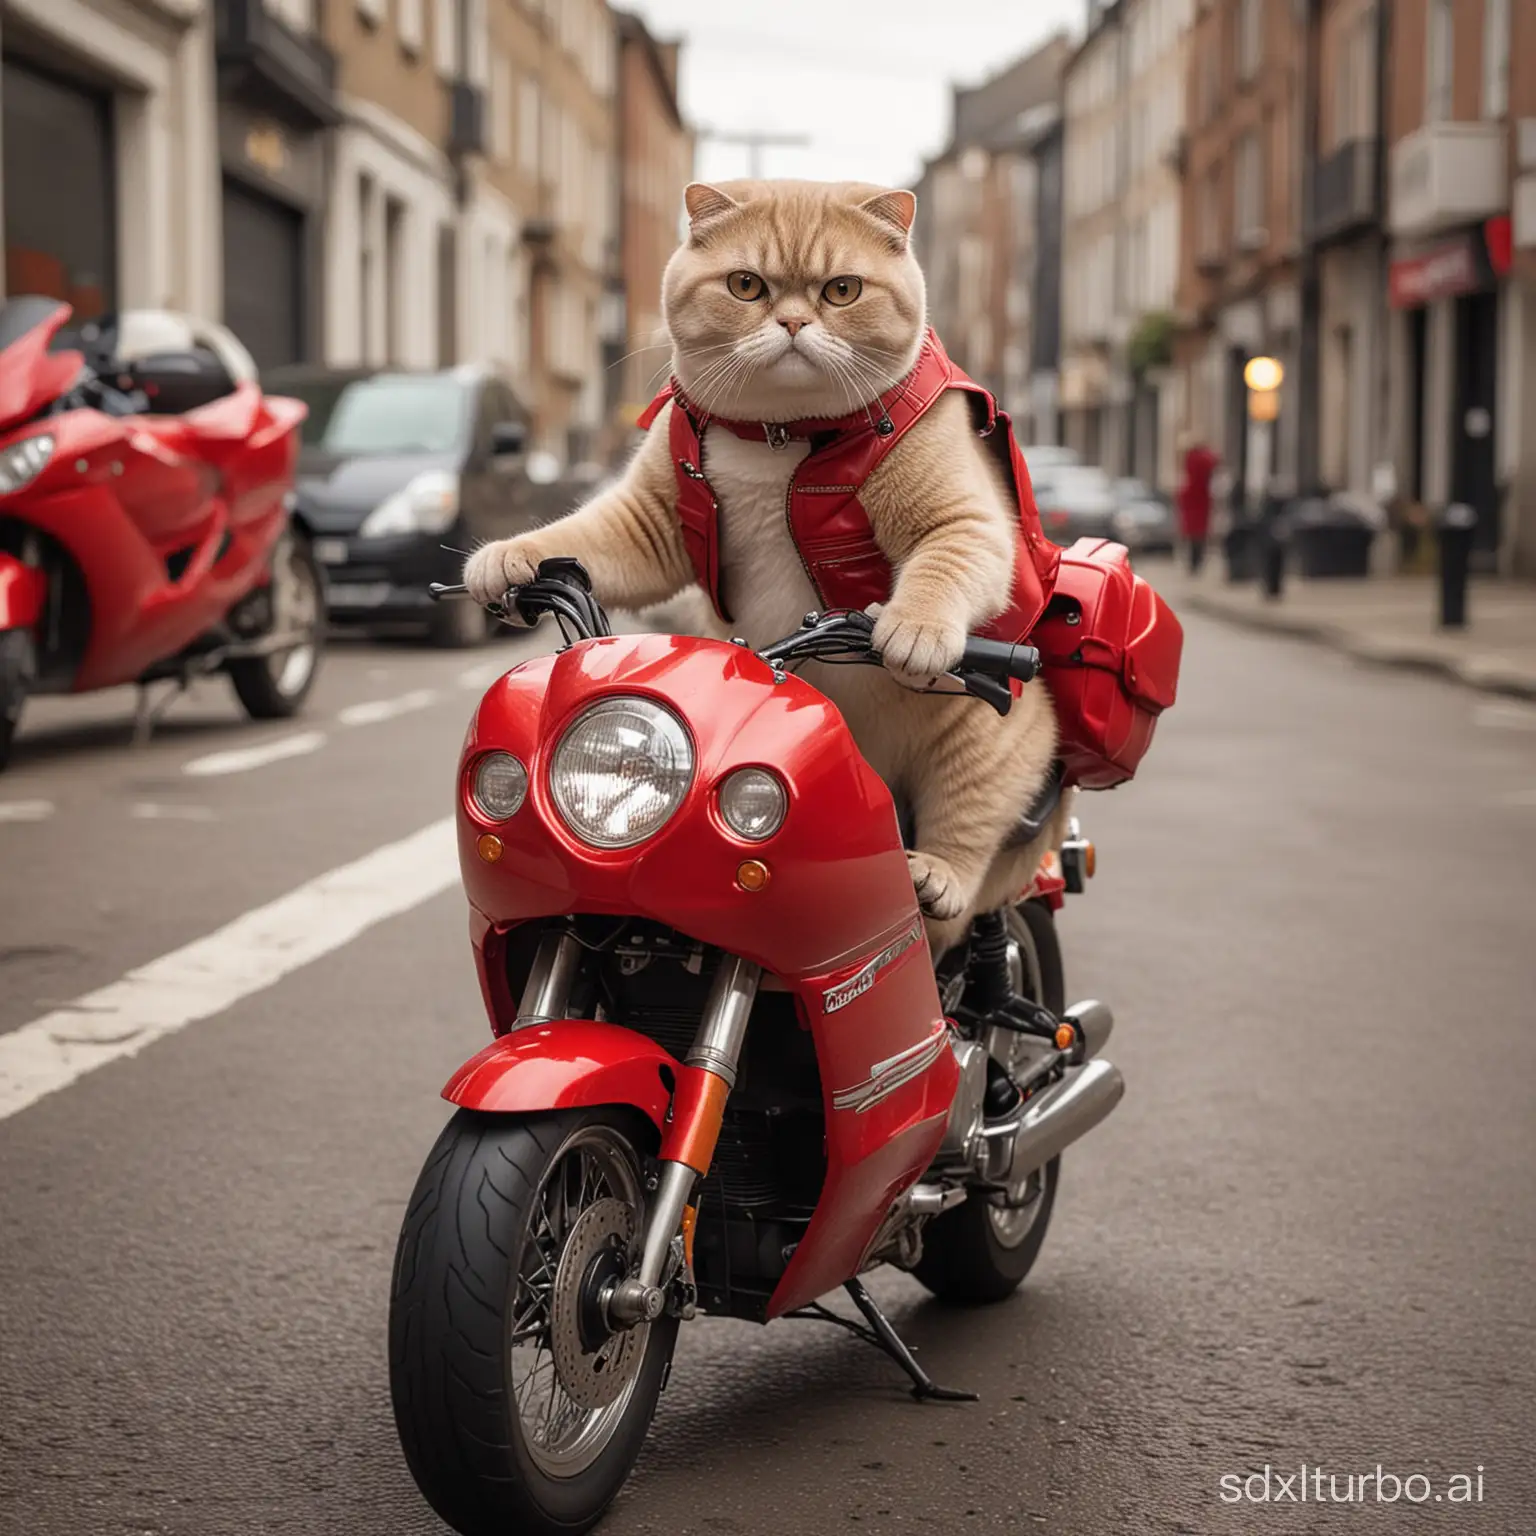 Muscular-Scottish-Fold-Cat-Riding-Red-Super-Motorcycle-Through-City-Streets